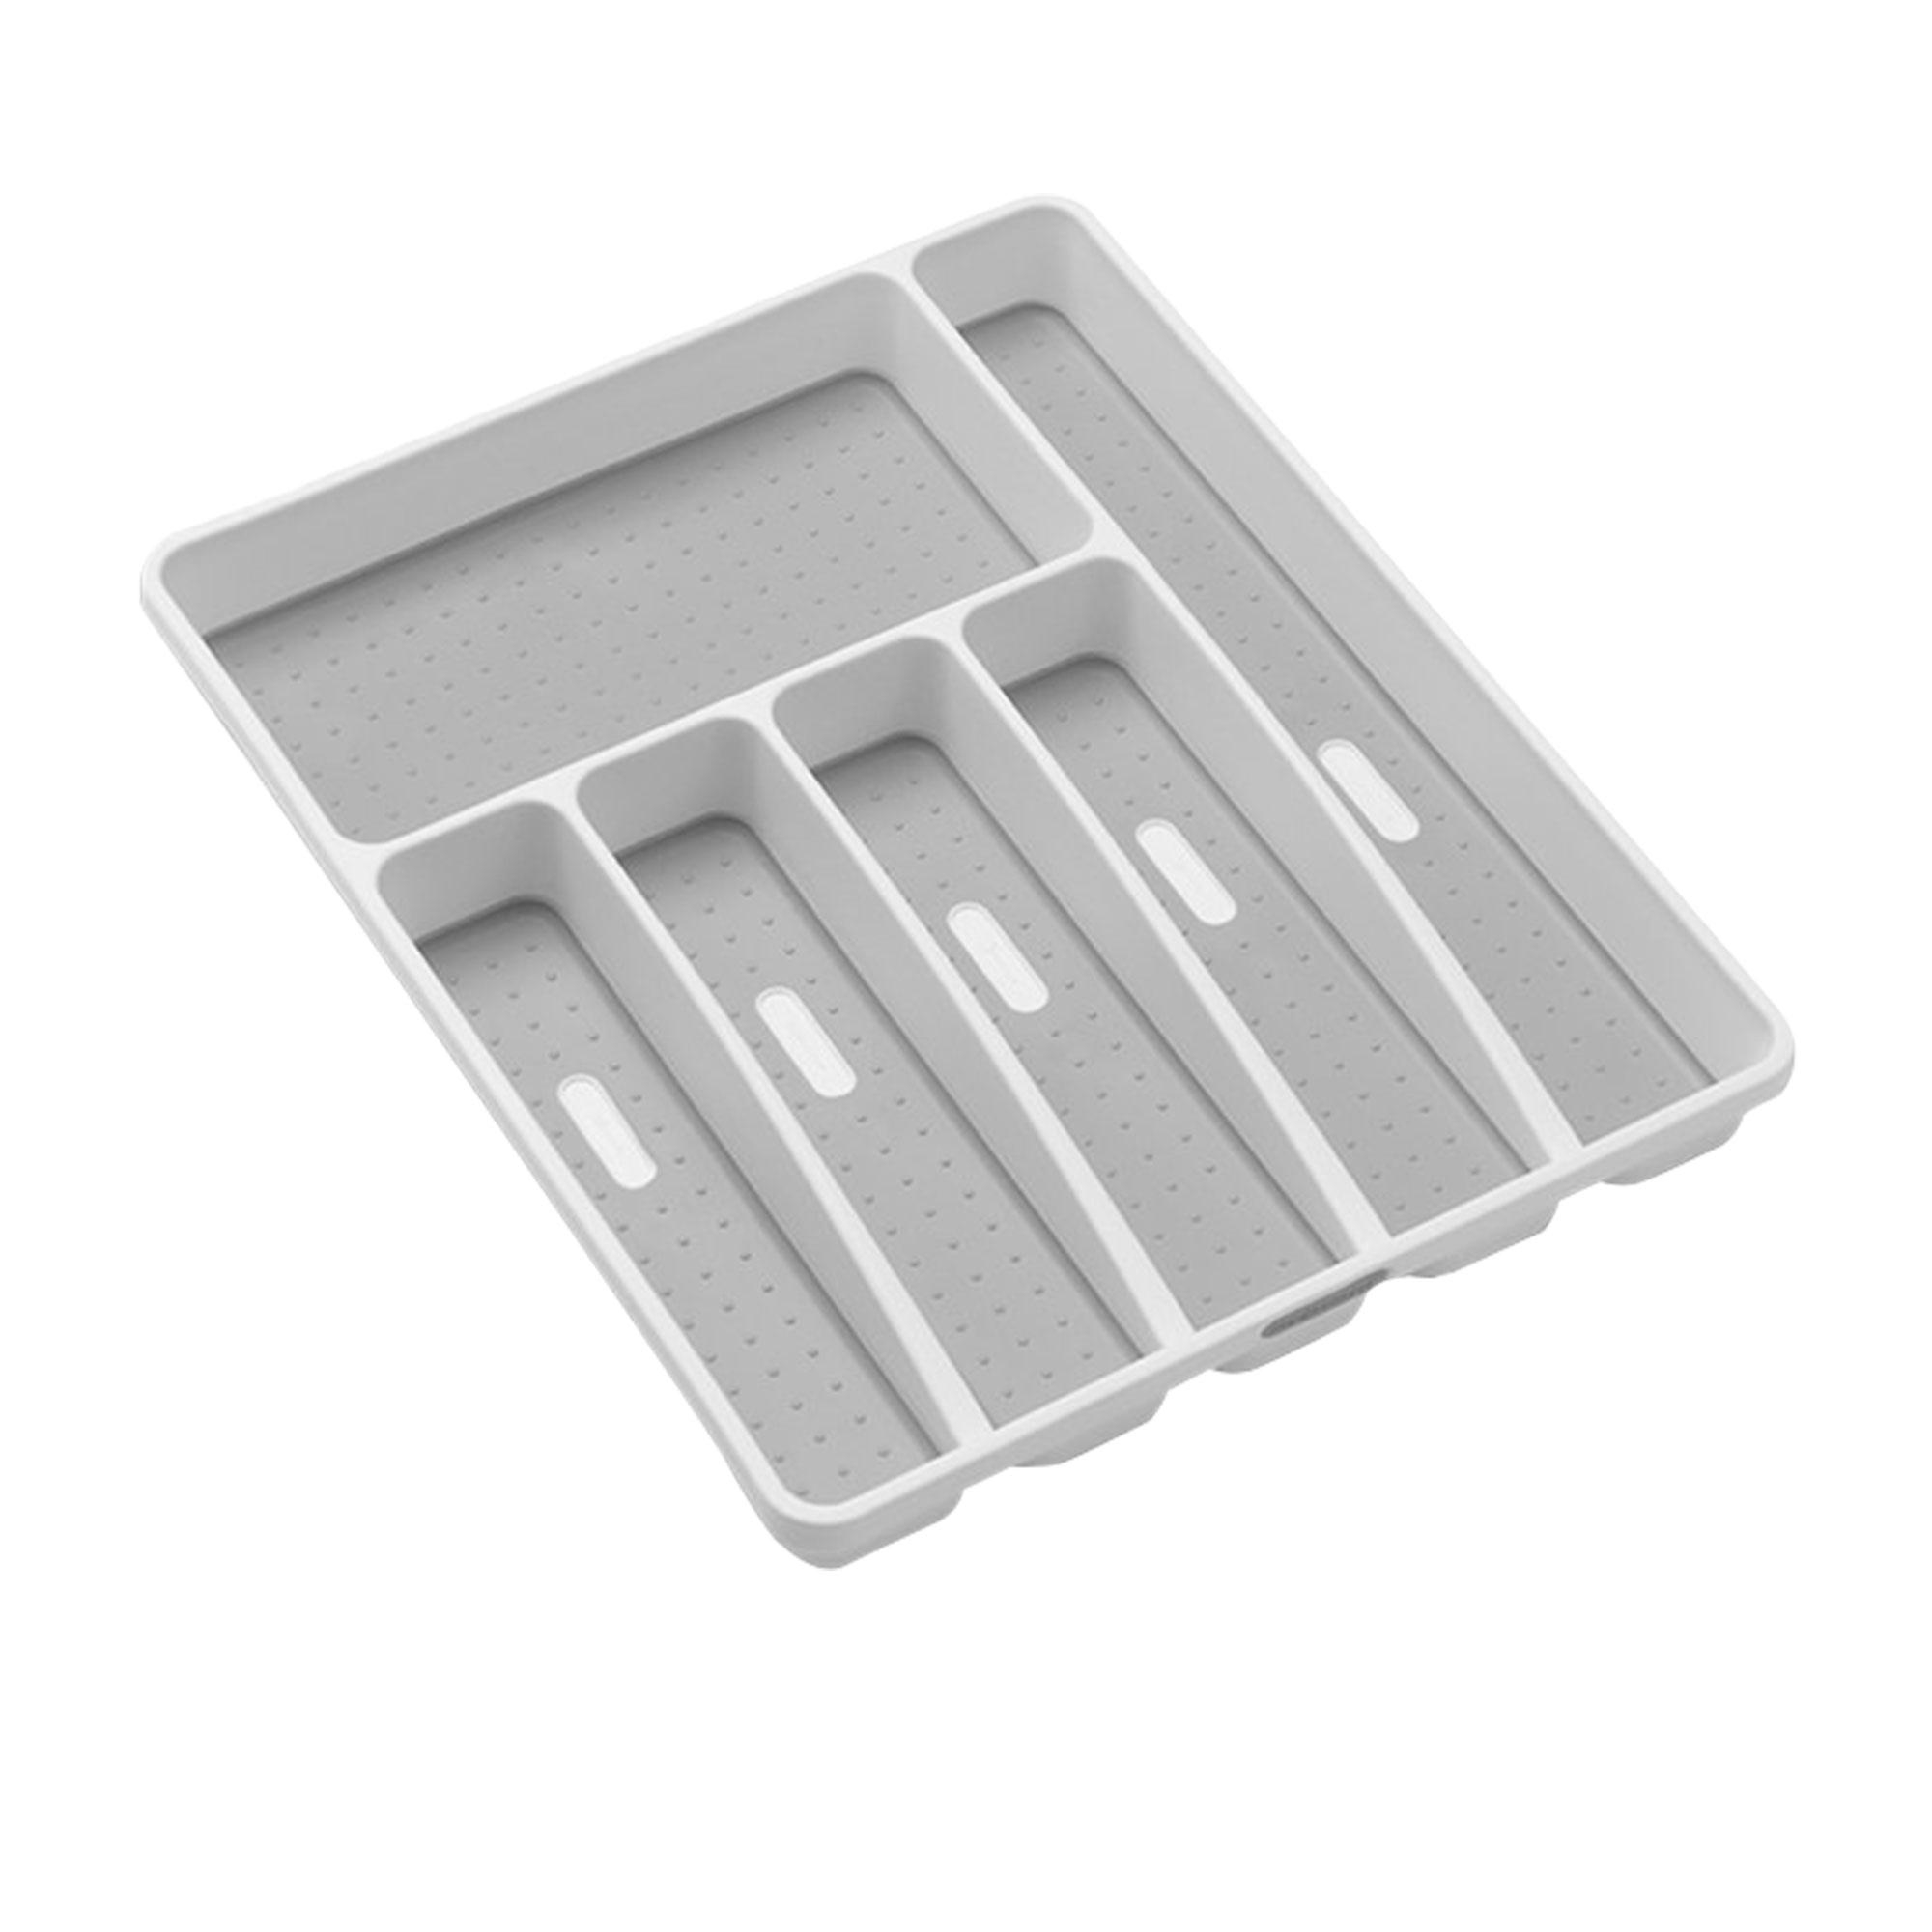 Madesmart Cutlery Tray 6 Compartment White Image 1